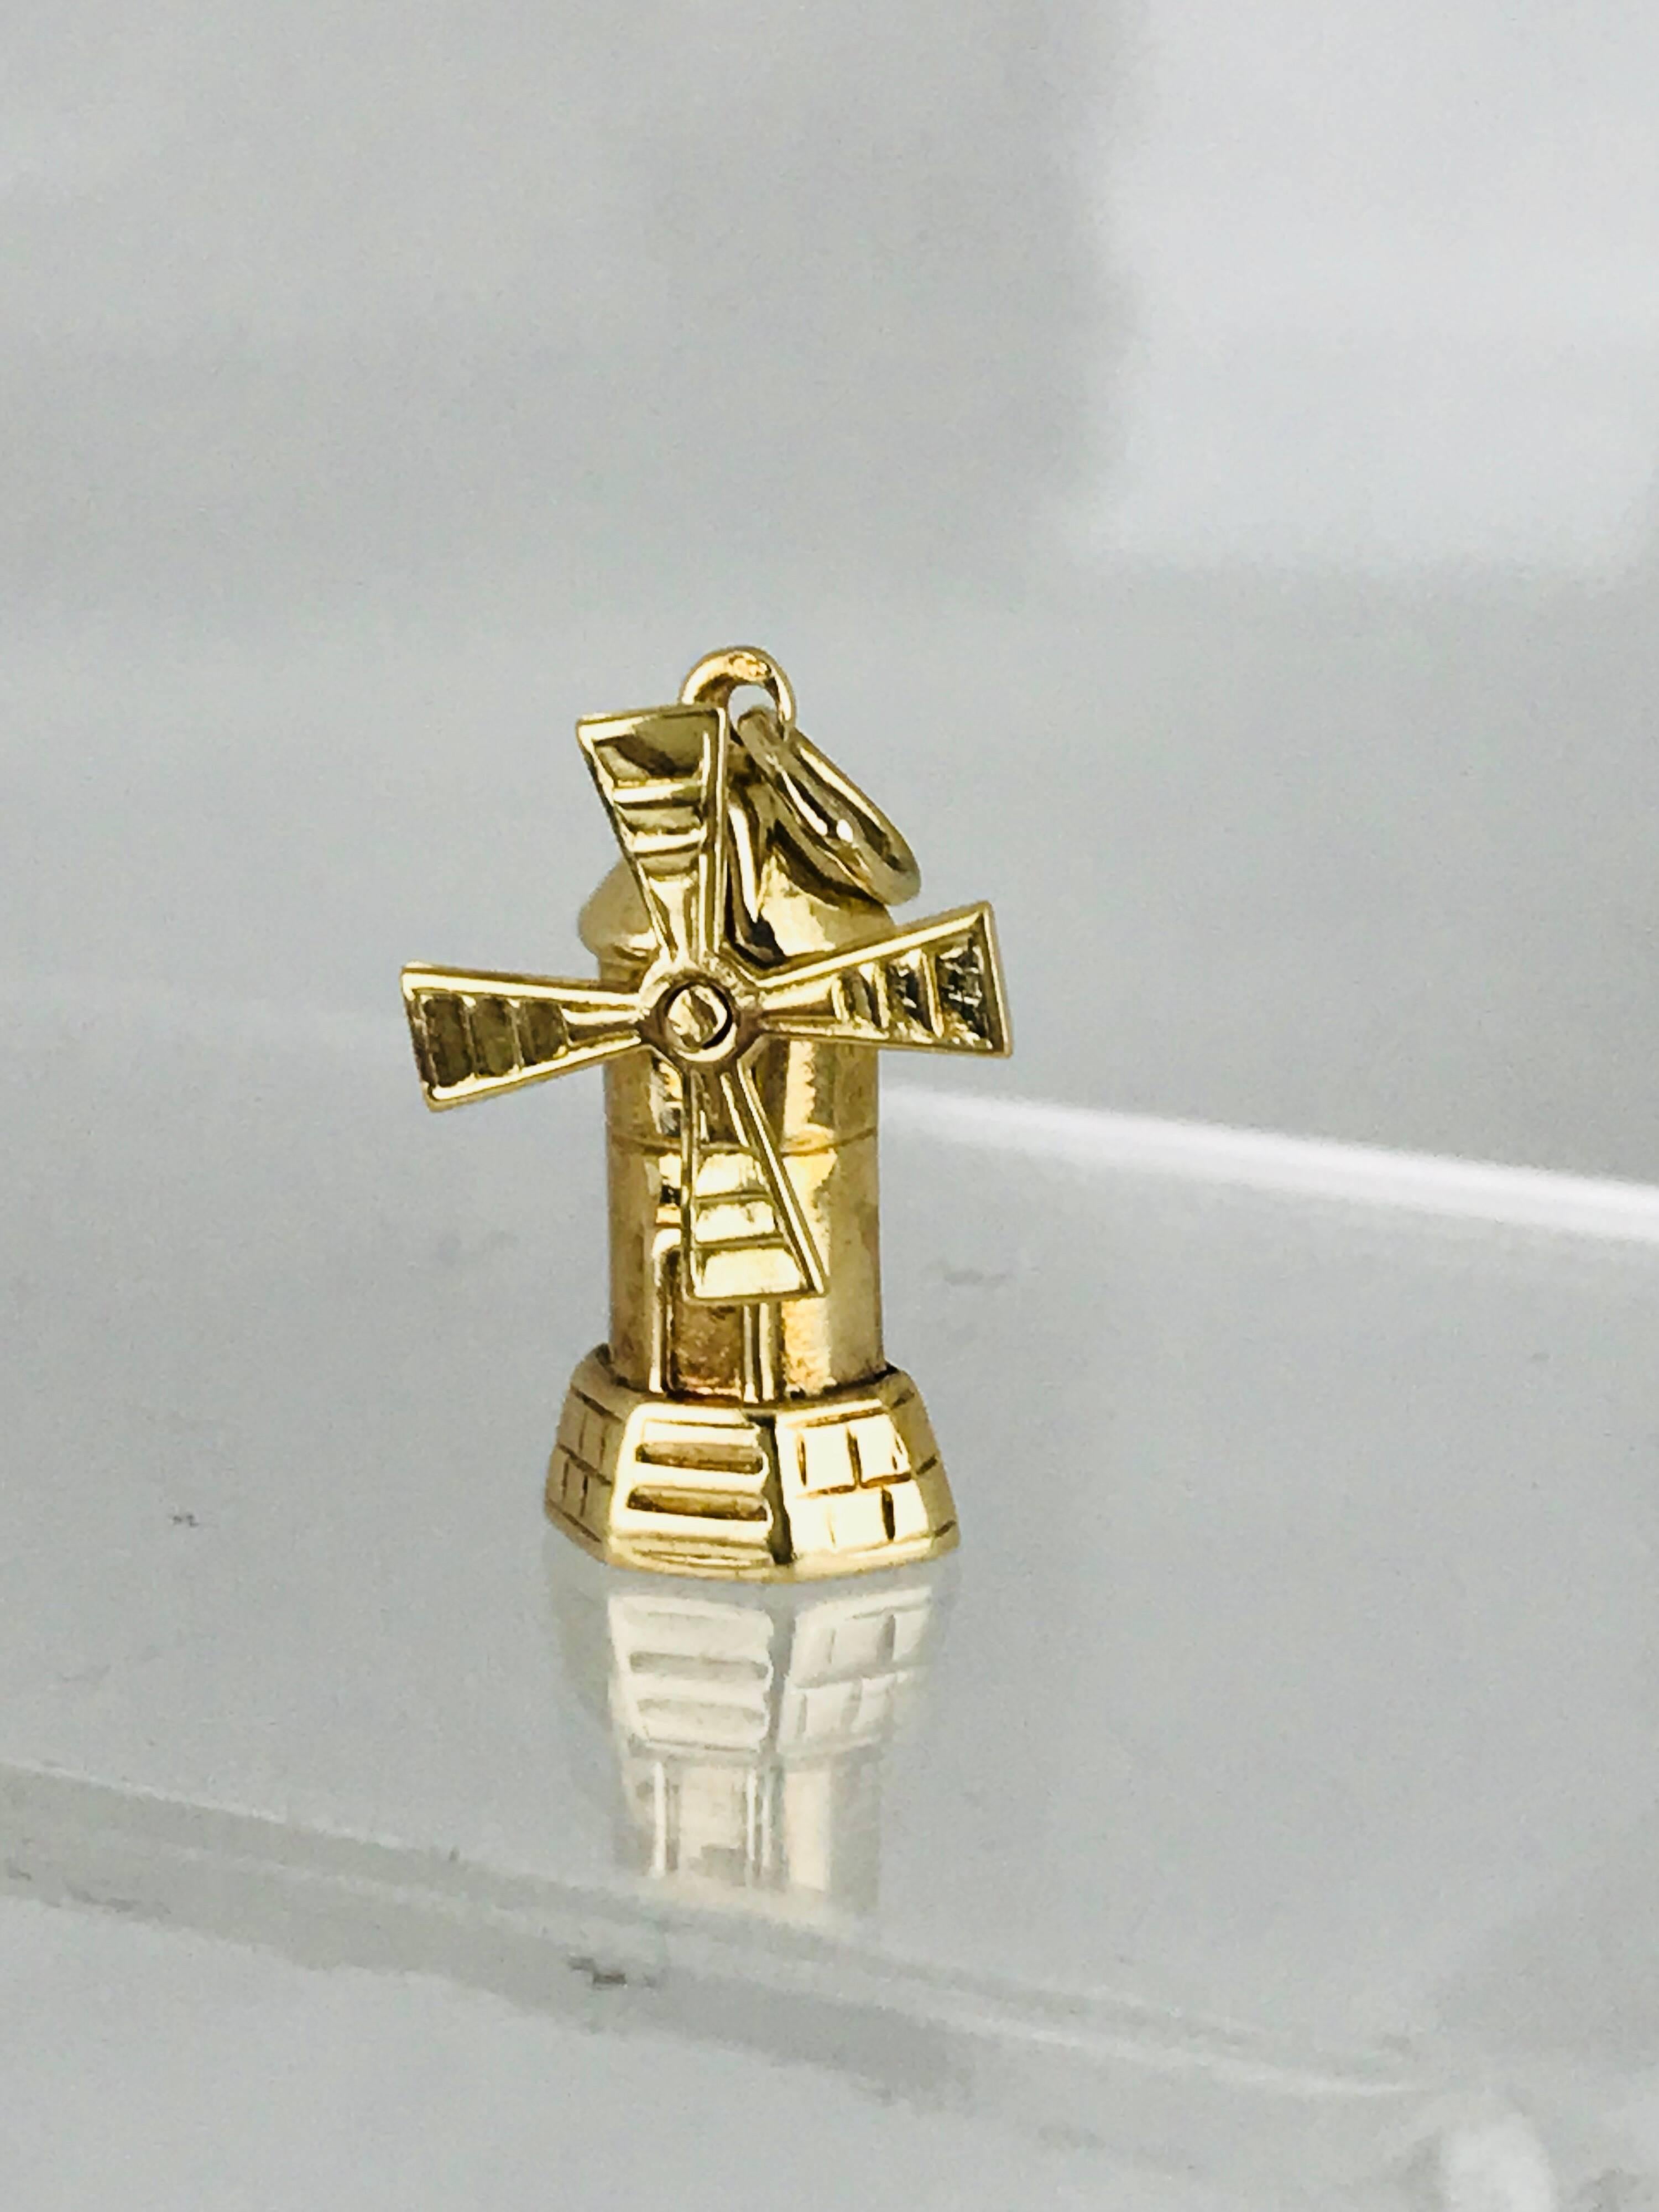 Windmill, With Movable Mill, 14 Karat Yellow Gold, Circa 1930's
Vintage, unique and hard to find Windmill can be used for charm bracelet or necklace

GIA Gemologist, inspected & evaluated